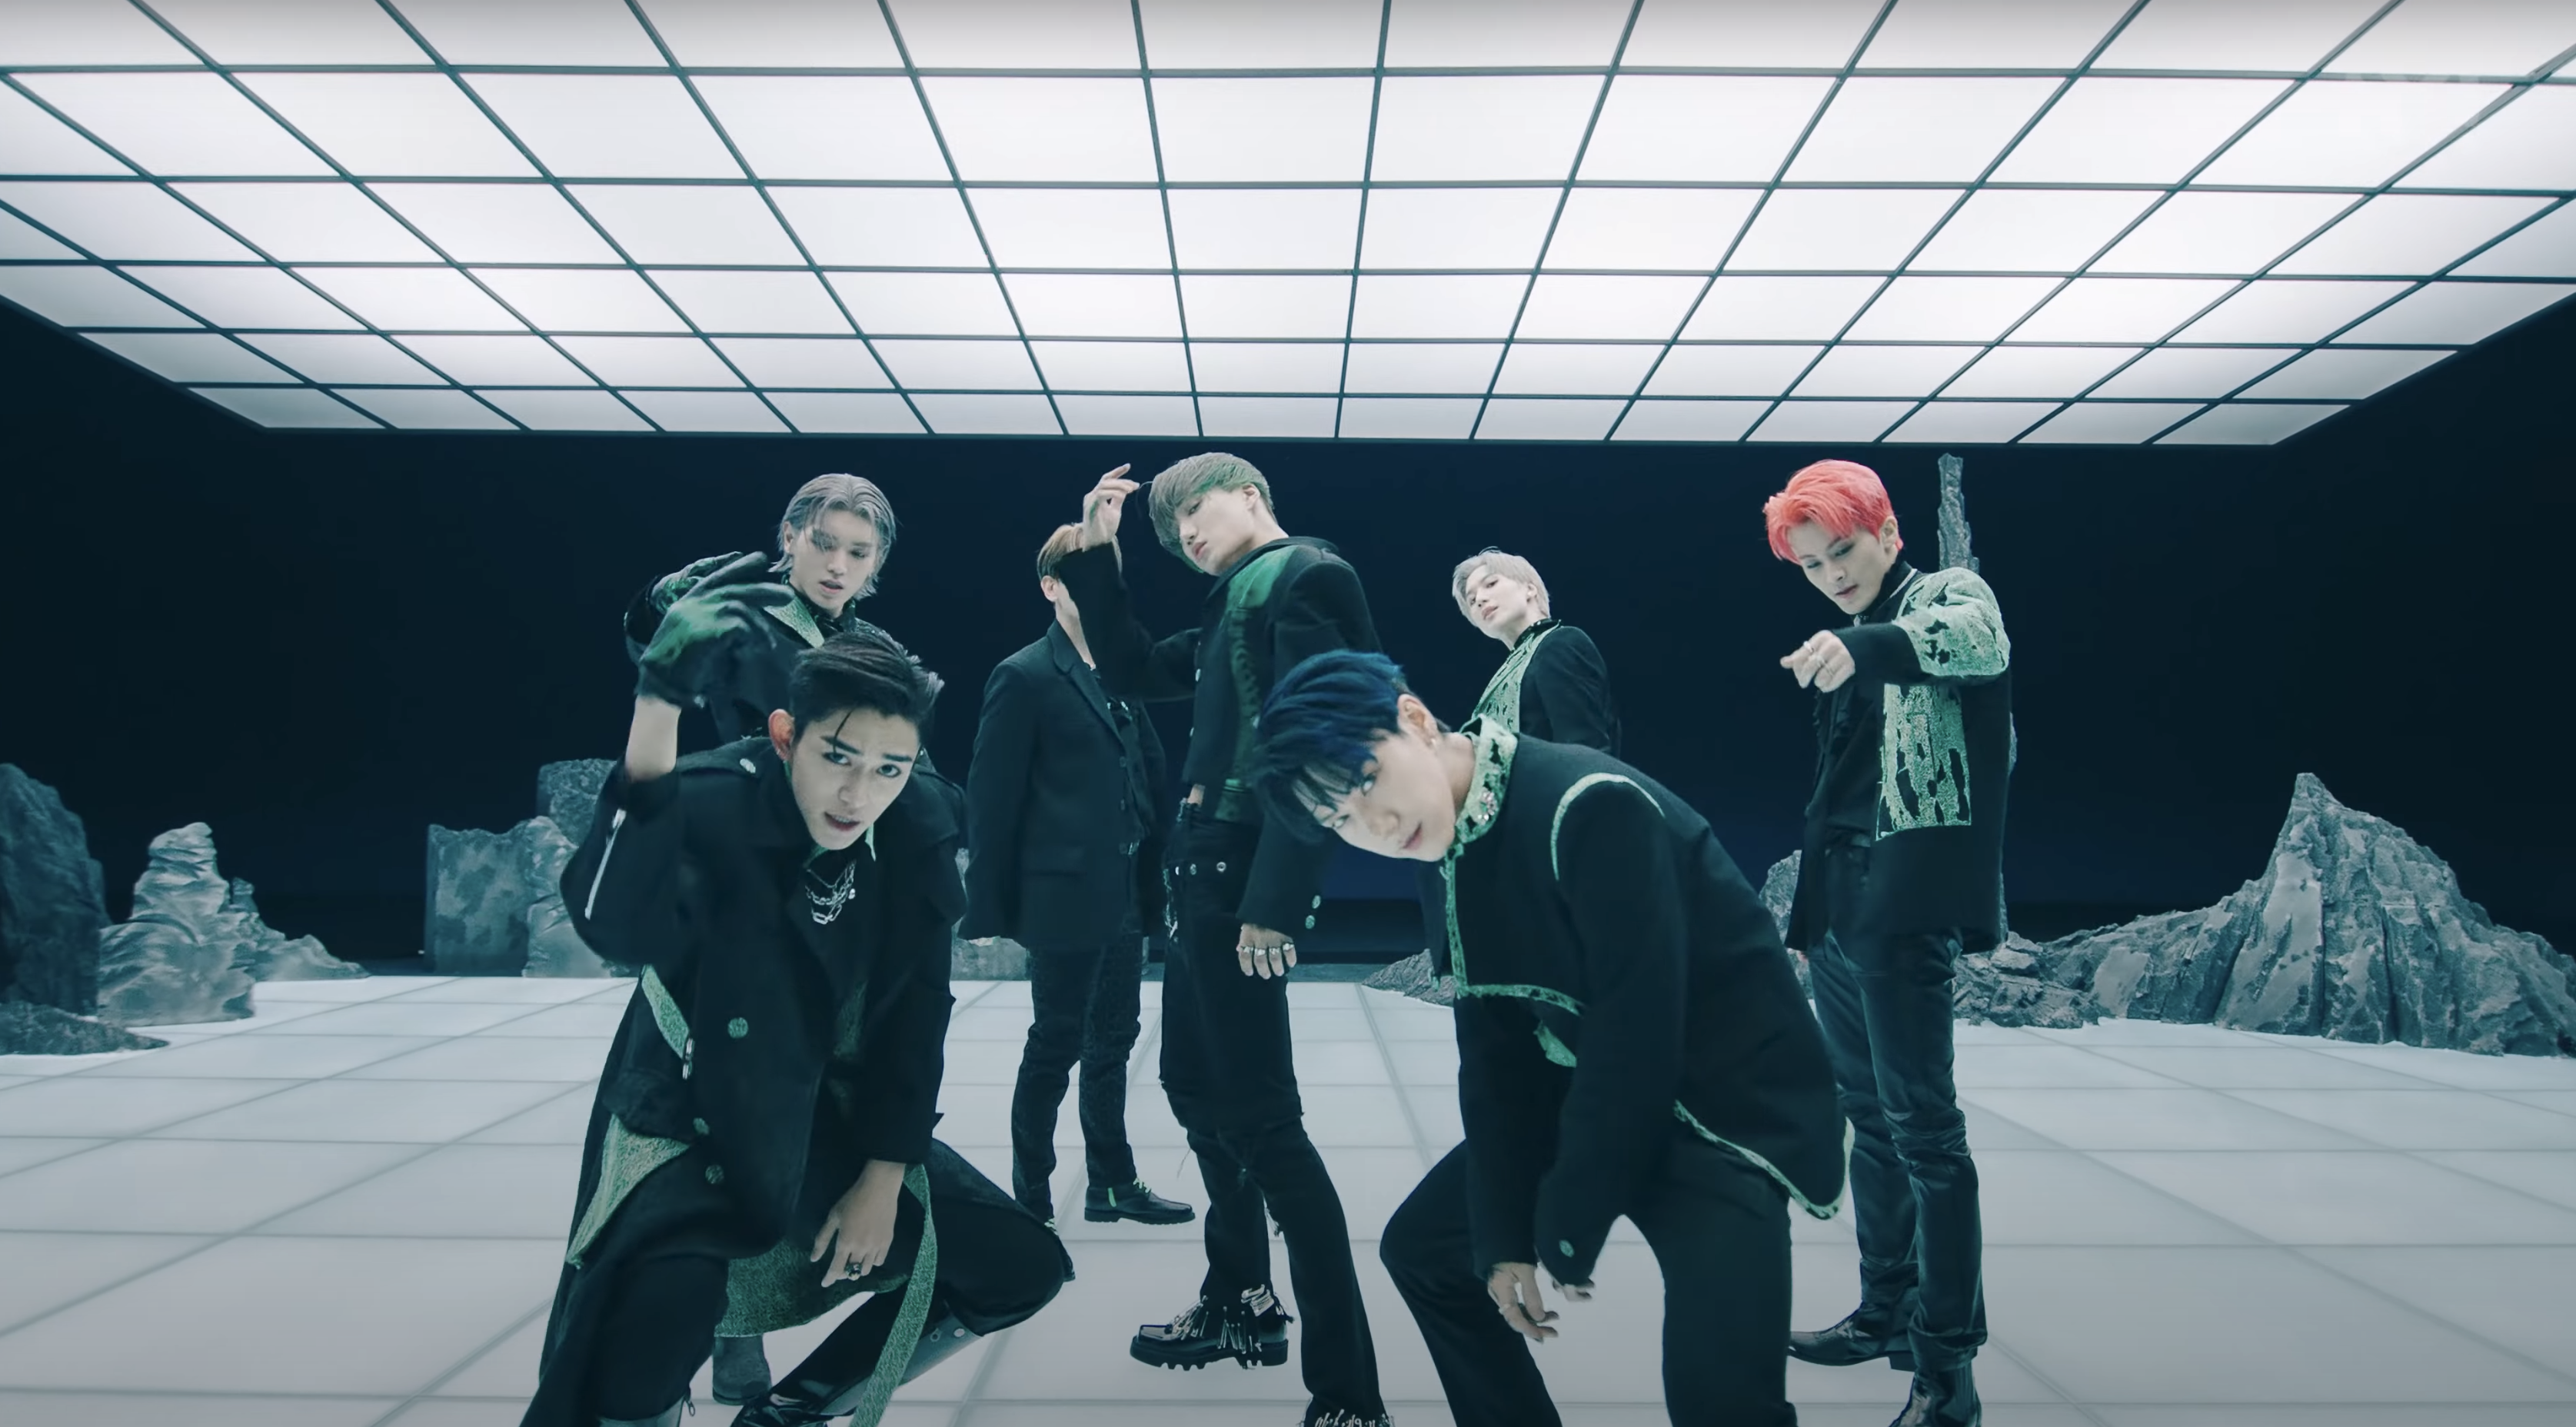 SuperM Released "One" Music Video With Superhero Theme